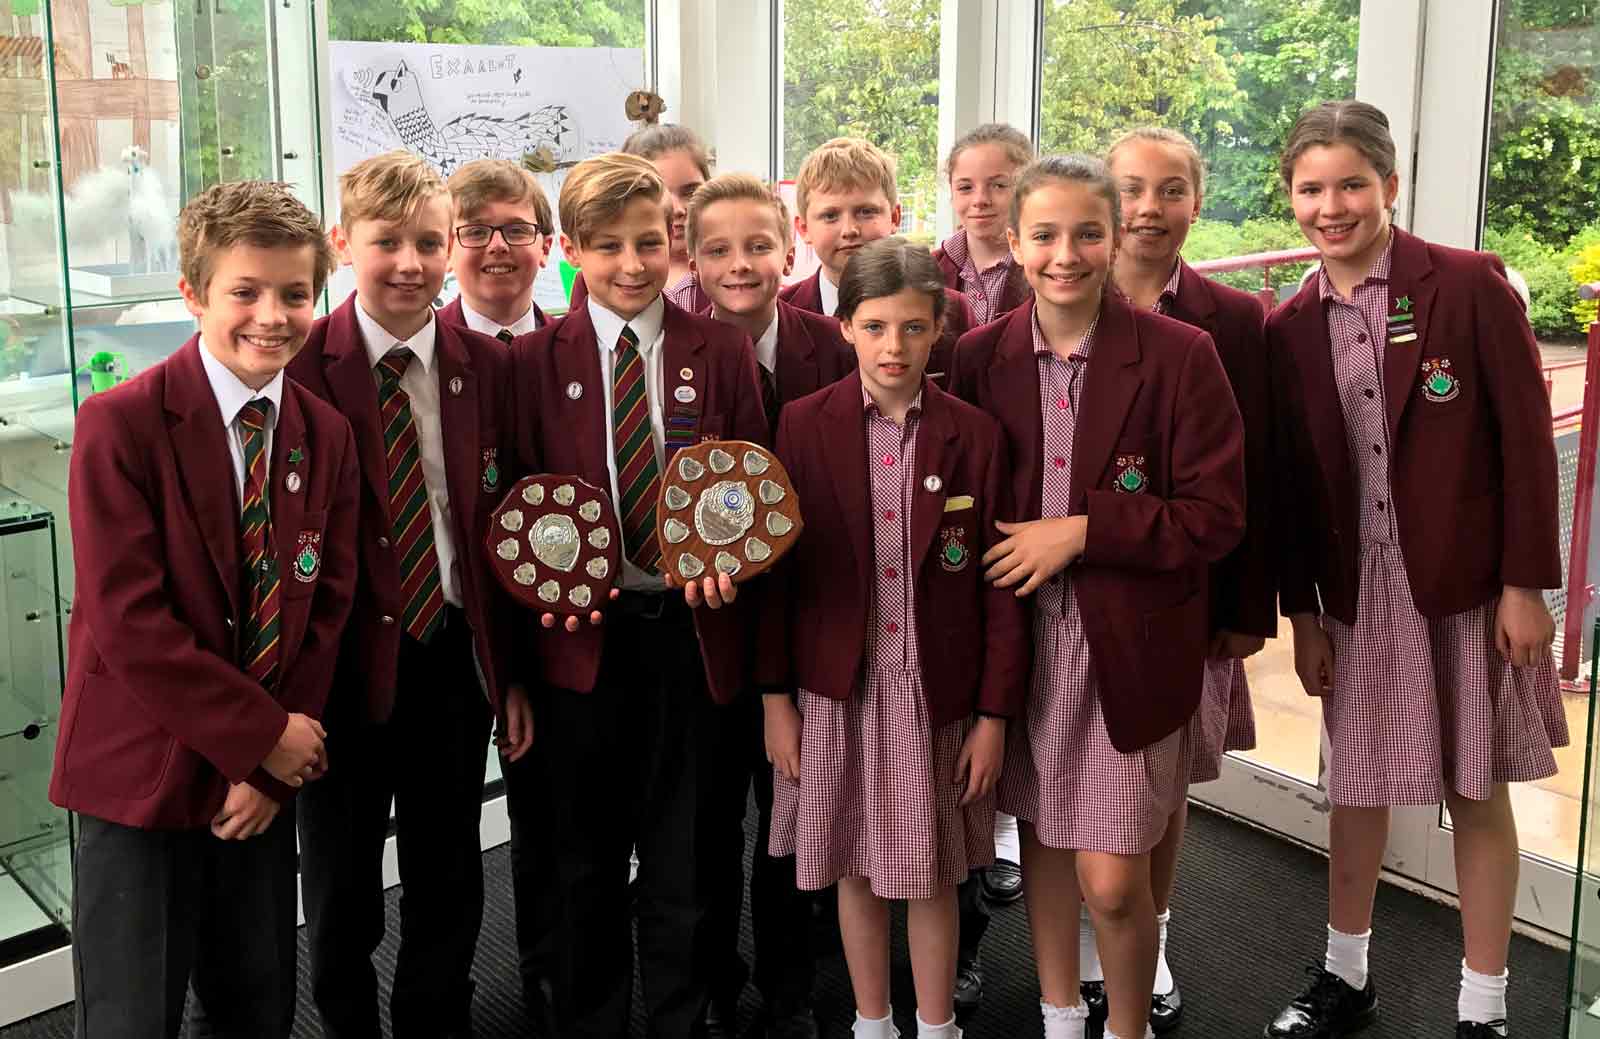 Swim to Win! The Ashville Junior School swimmers who competed in the IAPS (Independent Association of Prep Schools) National Swimming Finals